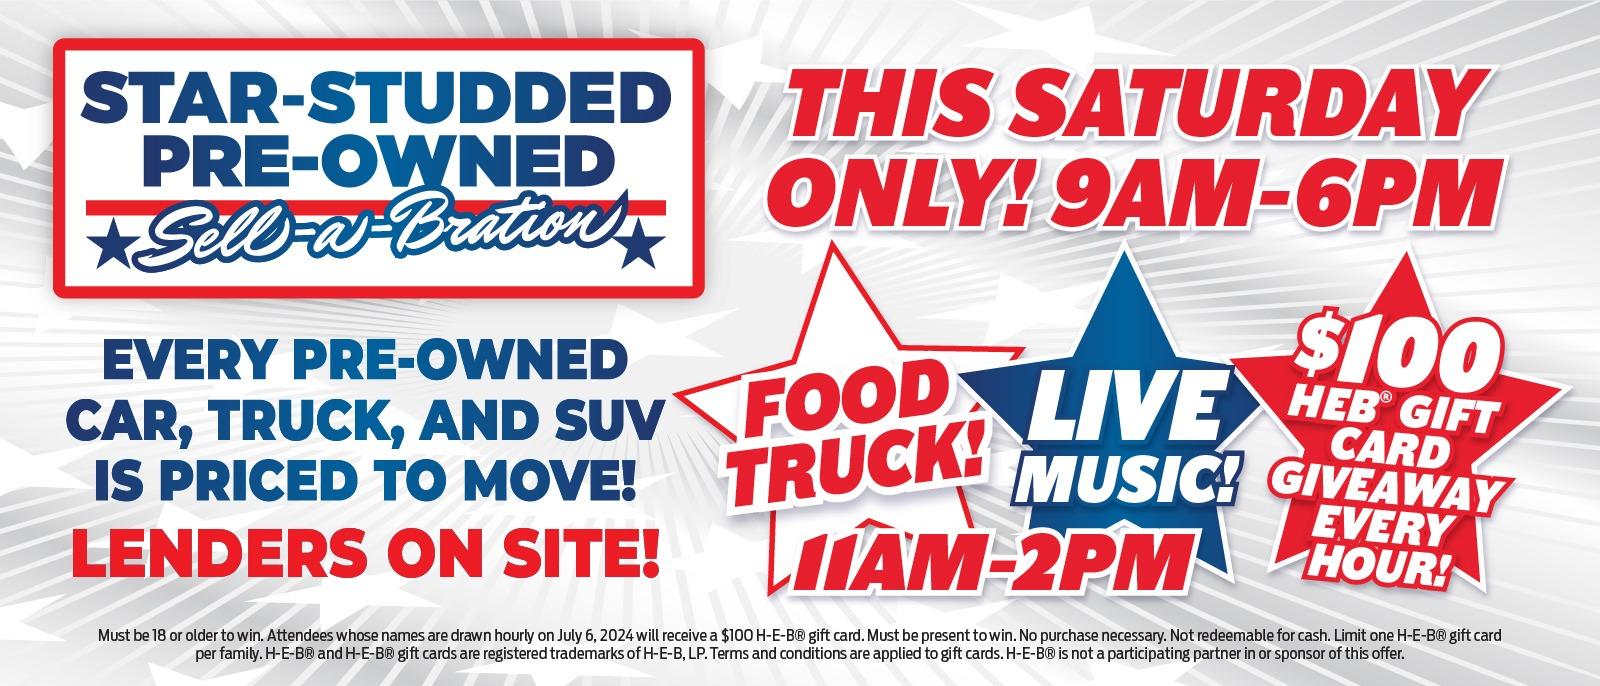 STAR-STUDDED PRE-OWNED ⭑Sell-a-Bration THIS SATURDAY ONLY! 9AM-6PM 
EVERY PRE-OWNED
CAR, TRUCK, AND SUV
IS PRICED TO MOVE!
LENDERS ON SITE!
FOOD TRUCK! LIVE MUSIC 11AM-2PM $100 HEB GIFT CARD GIVEAWAY EVERY HOUR